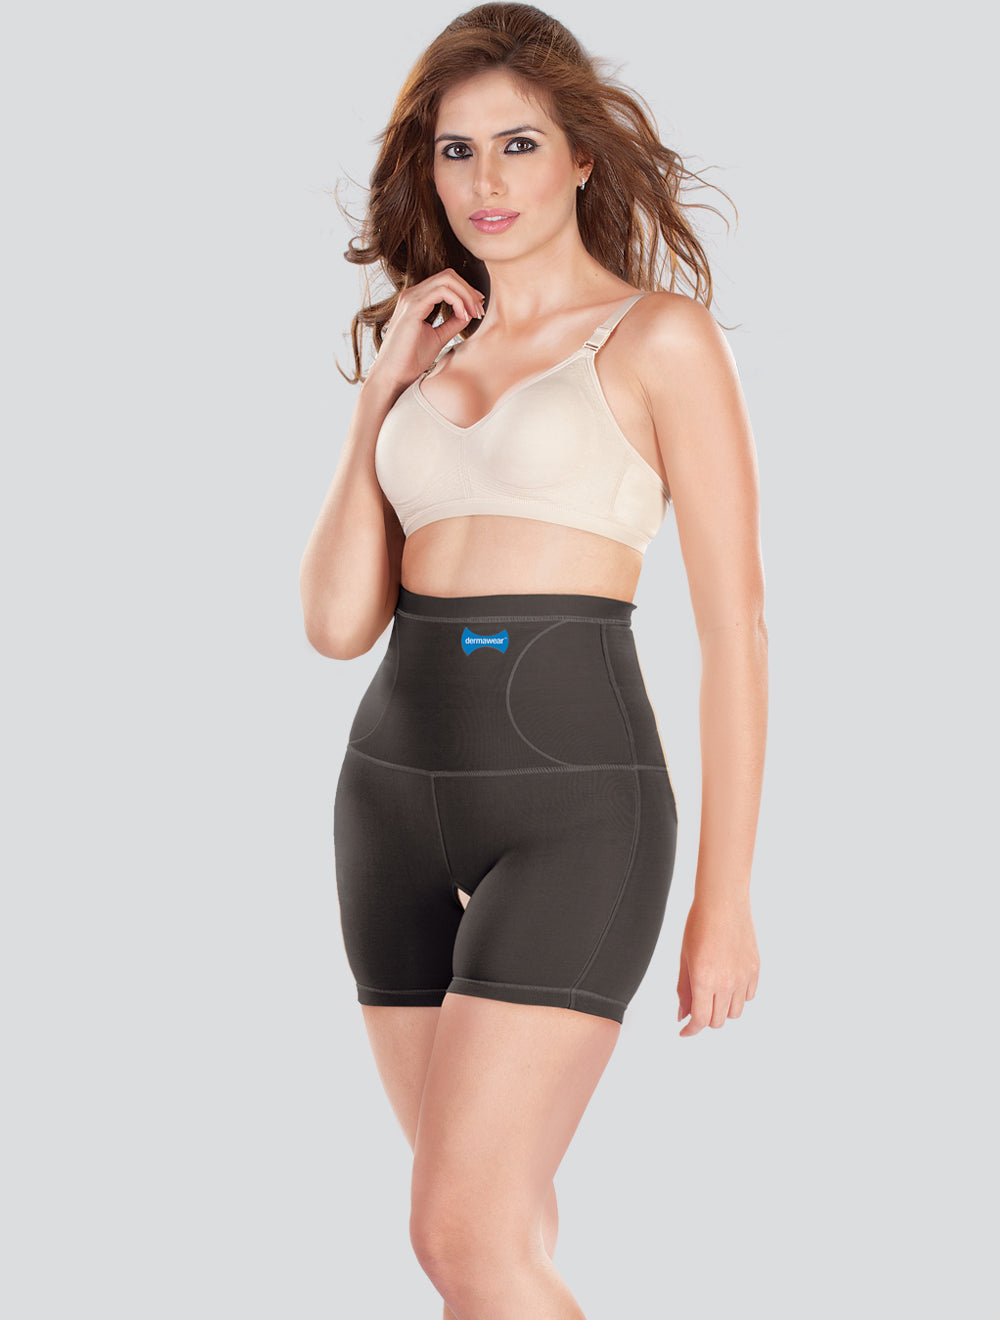 Dermawear Shapewear on Instagram: One stop for all - Men and Women's  Shapewears just a click away. Visit to check out what fits your style:  www.dermawear.co.in #FitInAbit #Dermawear #DermawearShapewear #Shapewear  #BodyShaper #waisttrainer #